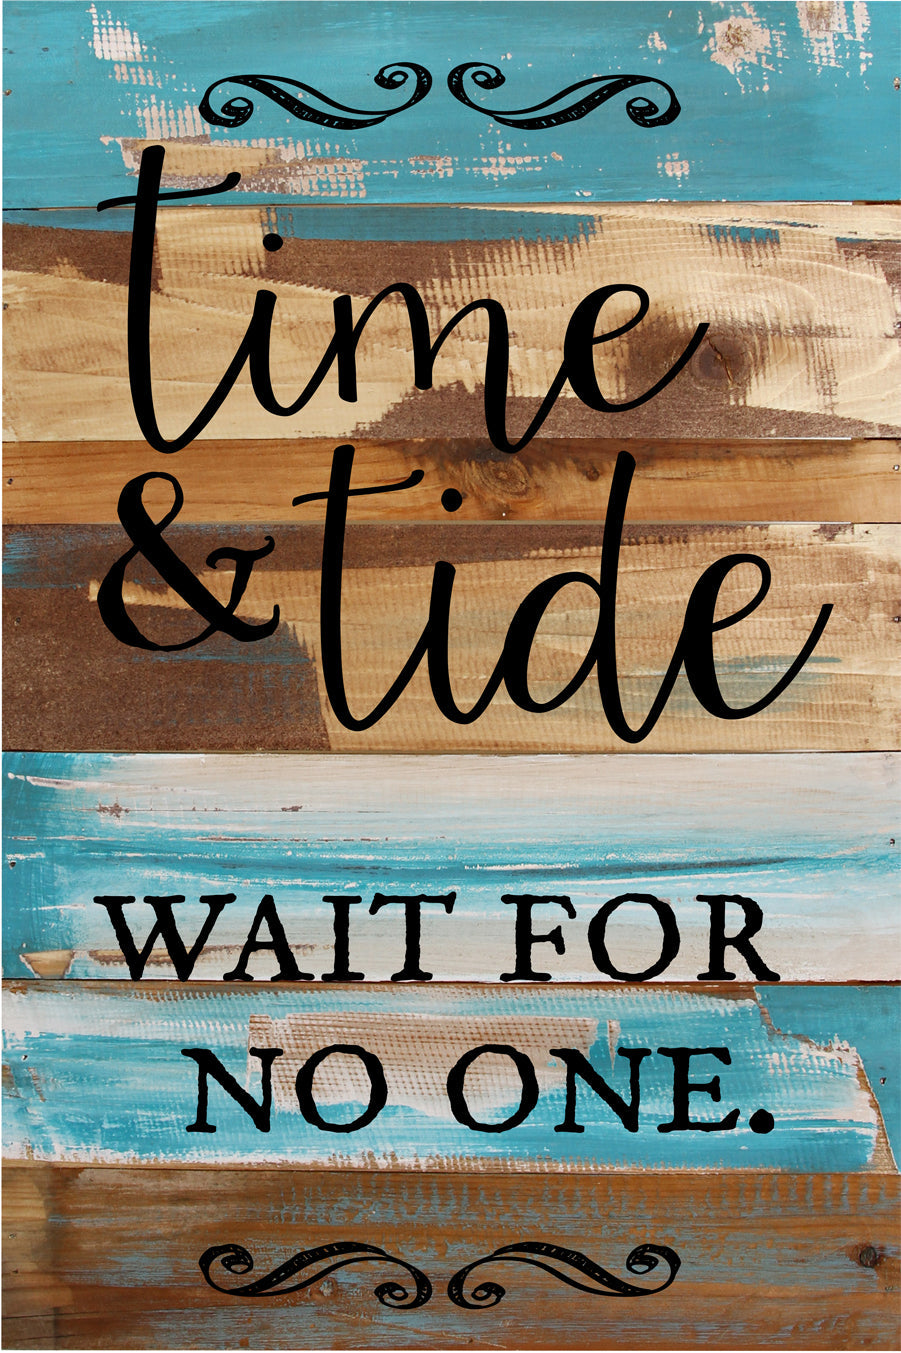 Time and tide wait for no one / 12x18 Reclaimed Wood Wall Art